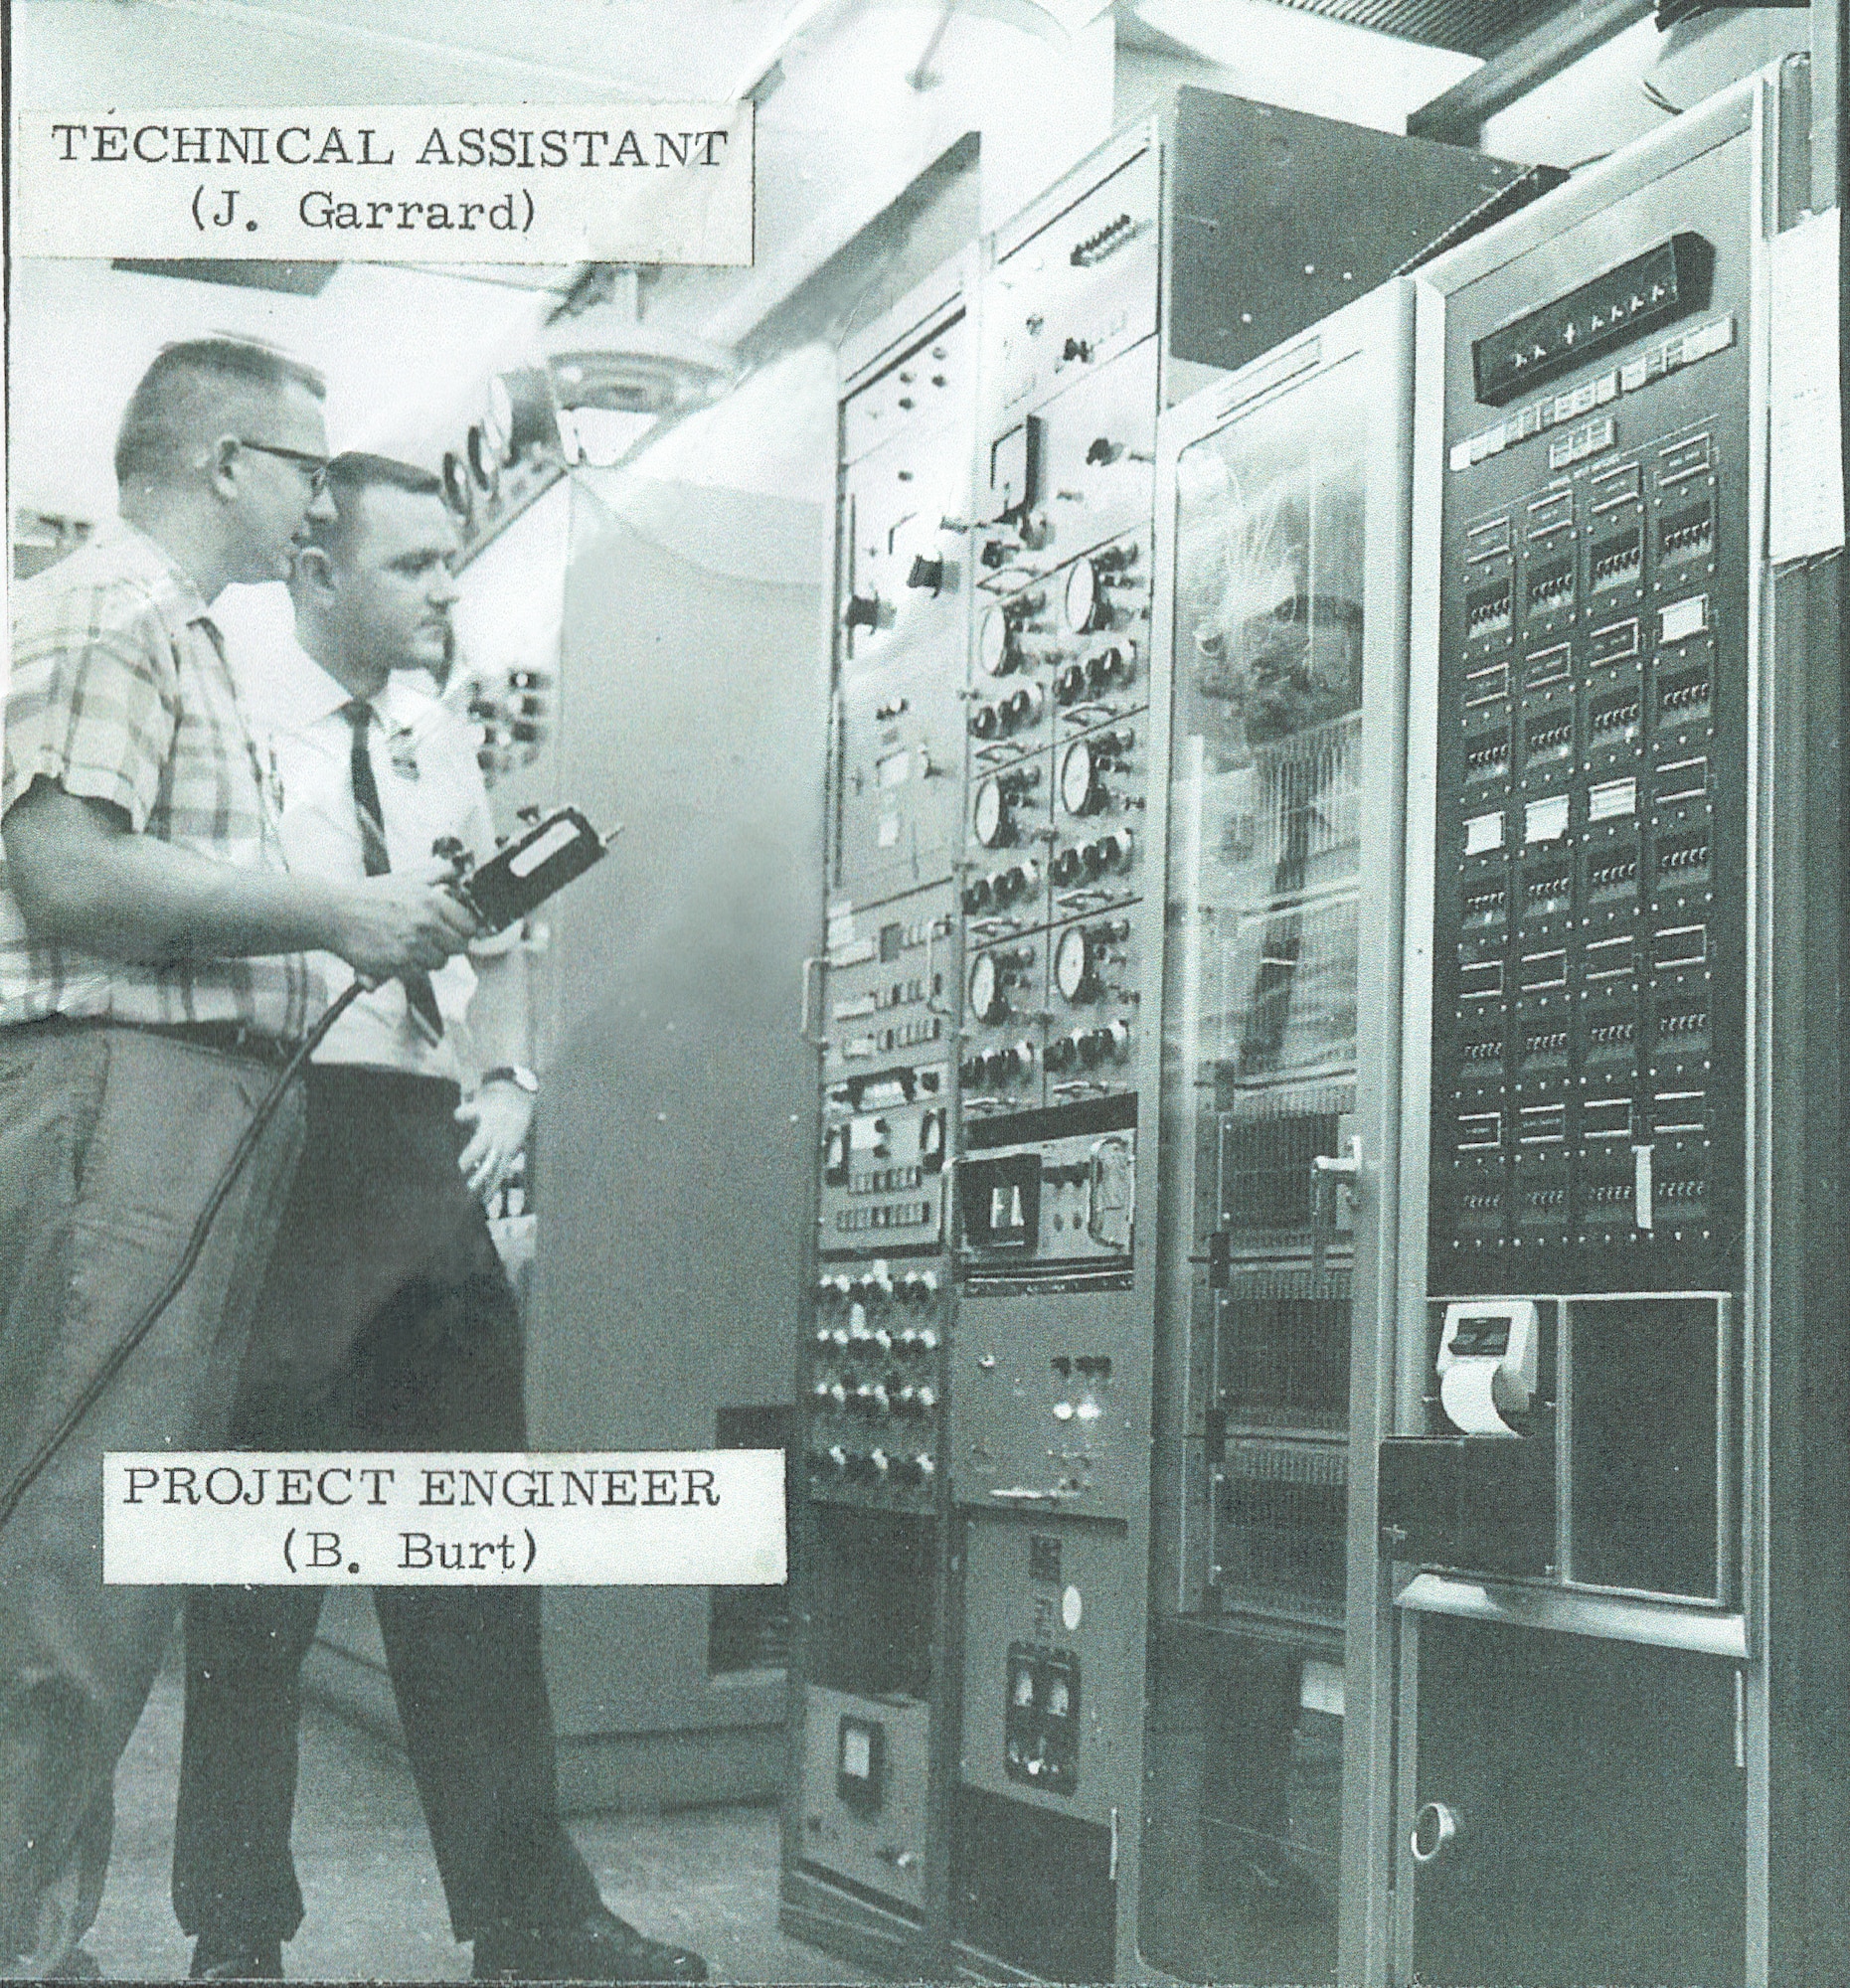 Jim Garrard, left, a technical assistant, and a Bob Burt, a project engineer, look at the force measurement instrumentation system in the Tunnel B control room in the late-1960s. (Courtesy photo)